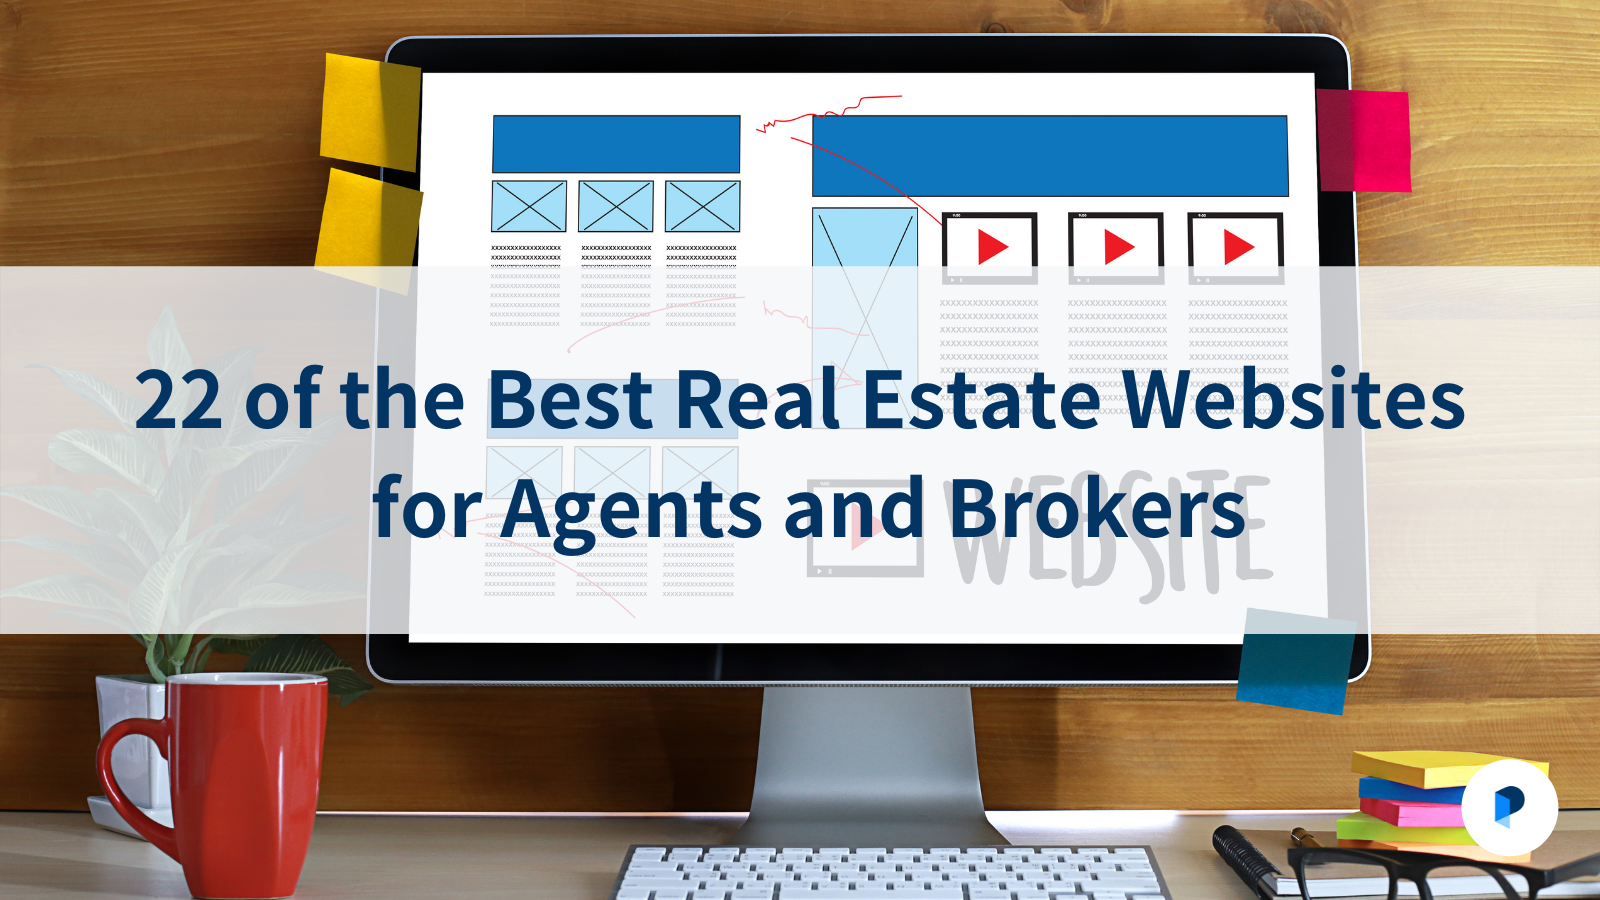 Best Real Estate Websites for Agents and Brokers in 2022